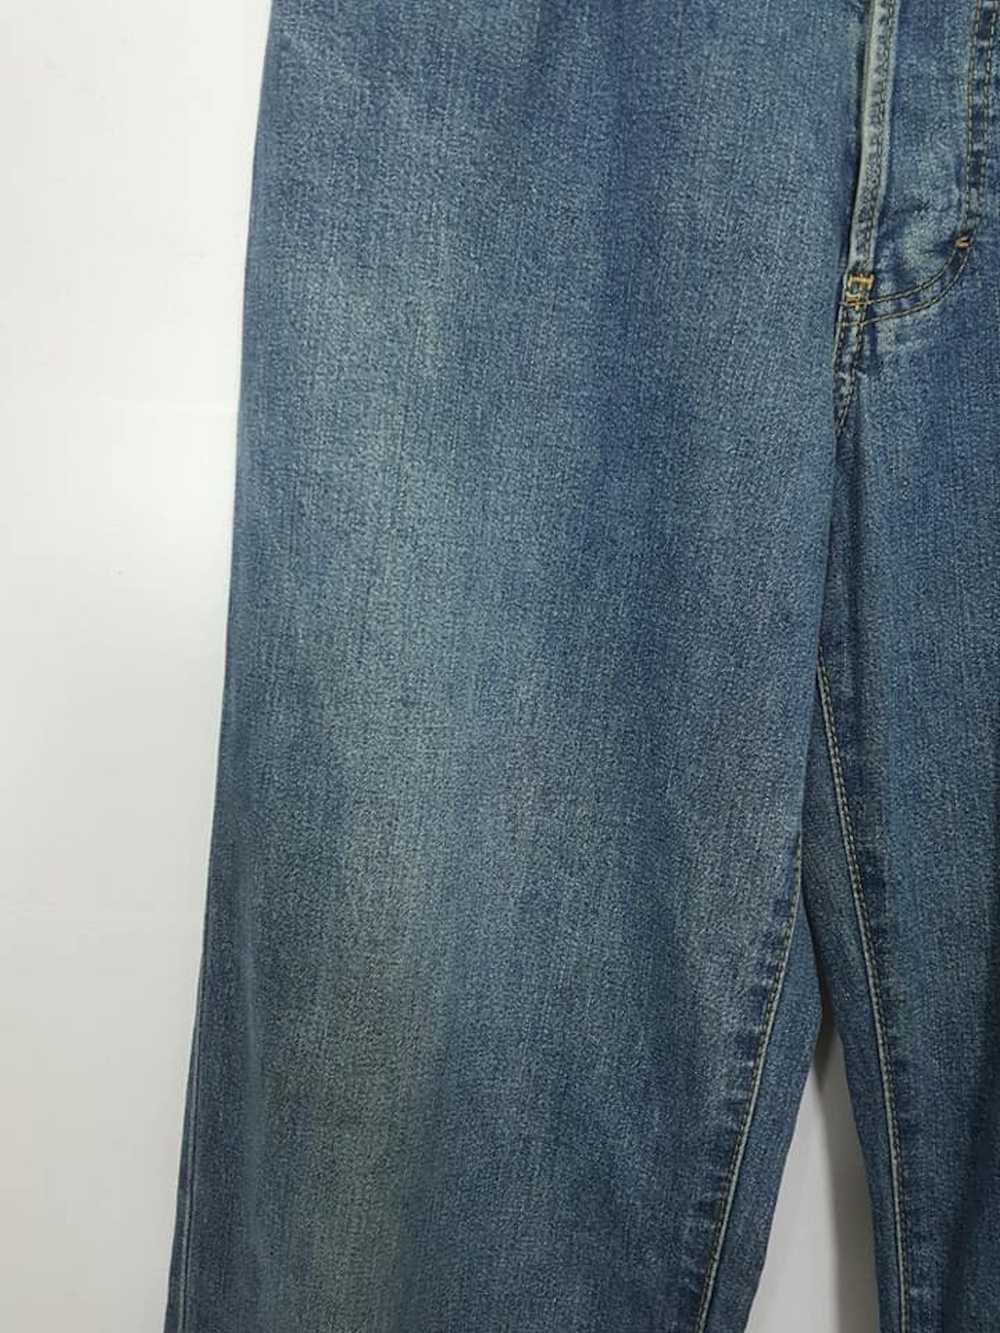 Paul Smith Paul Smith Button Fly Jeans MADE IN JA… - image 9